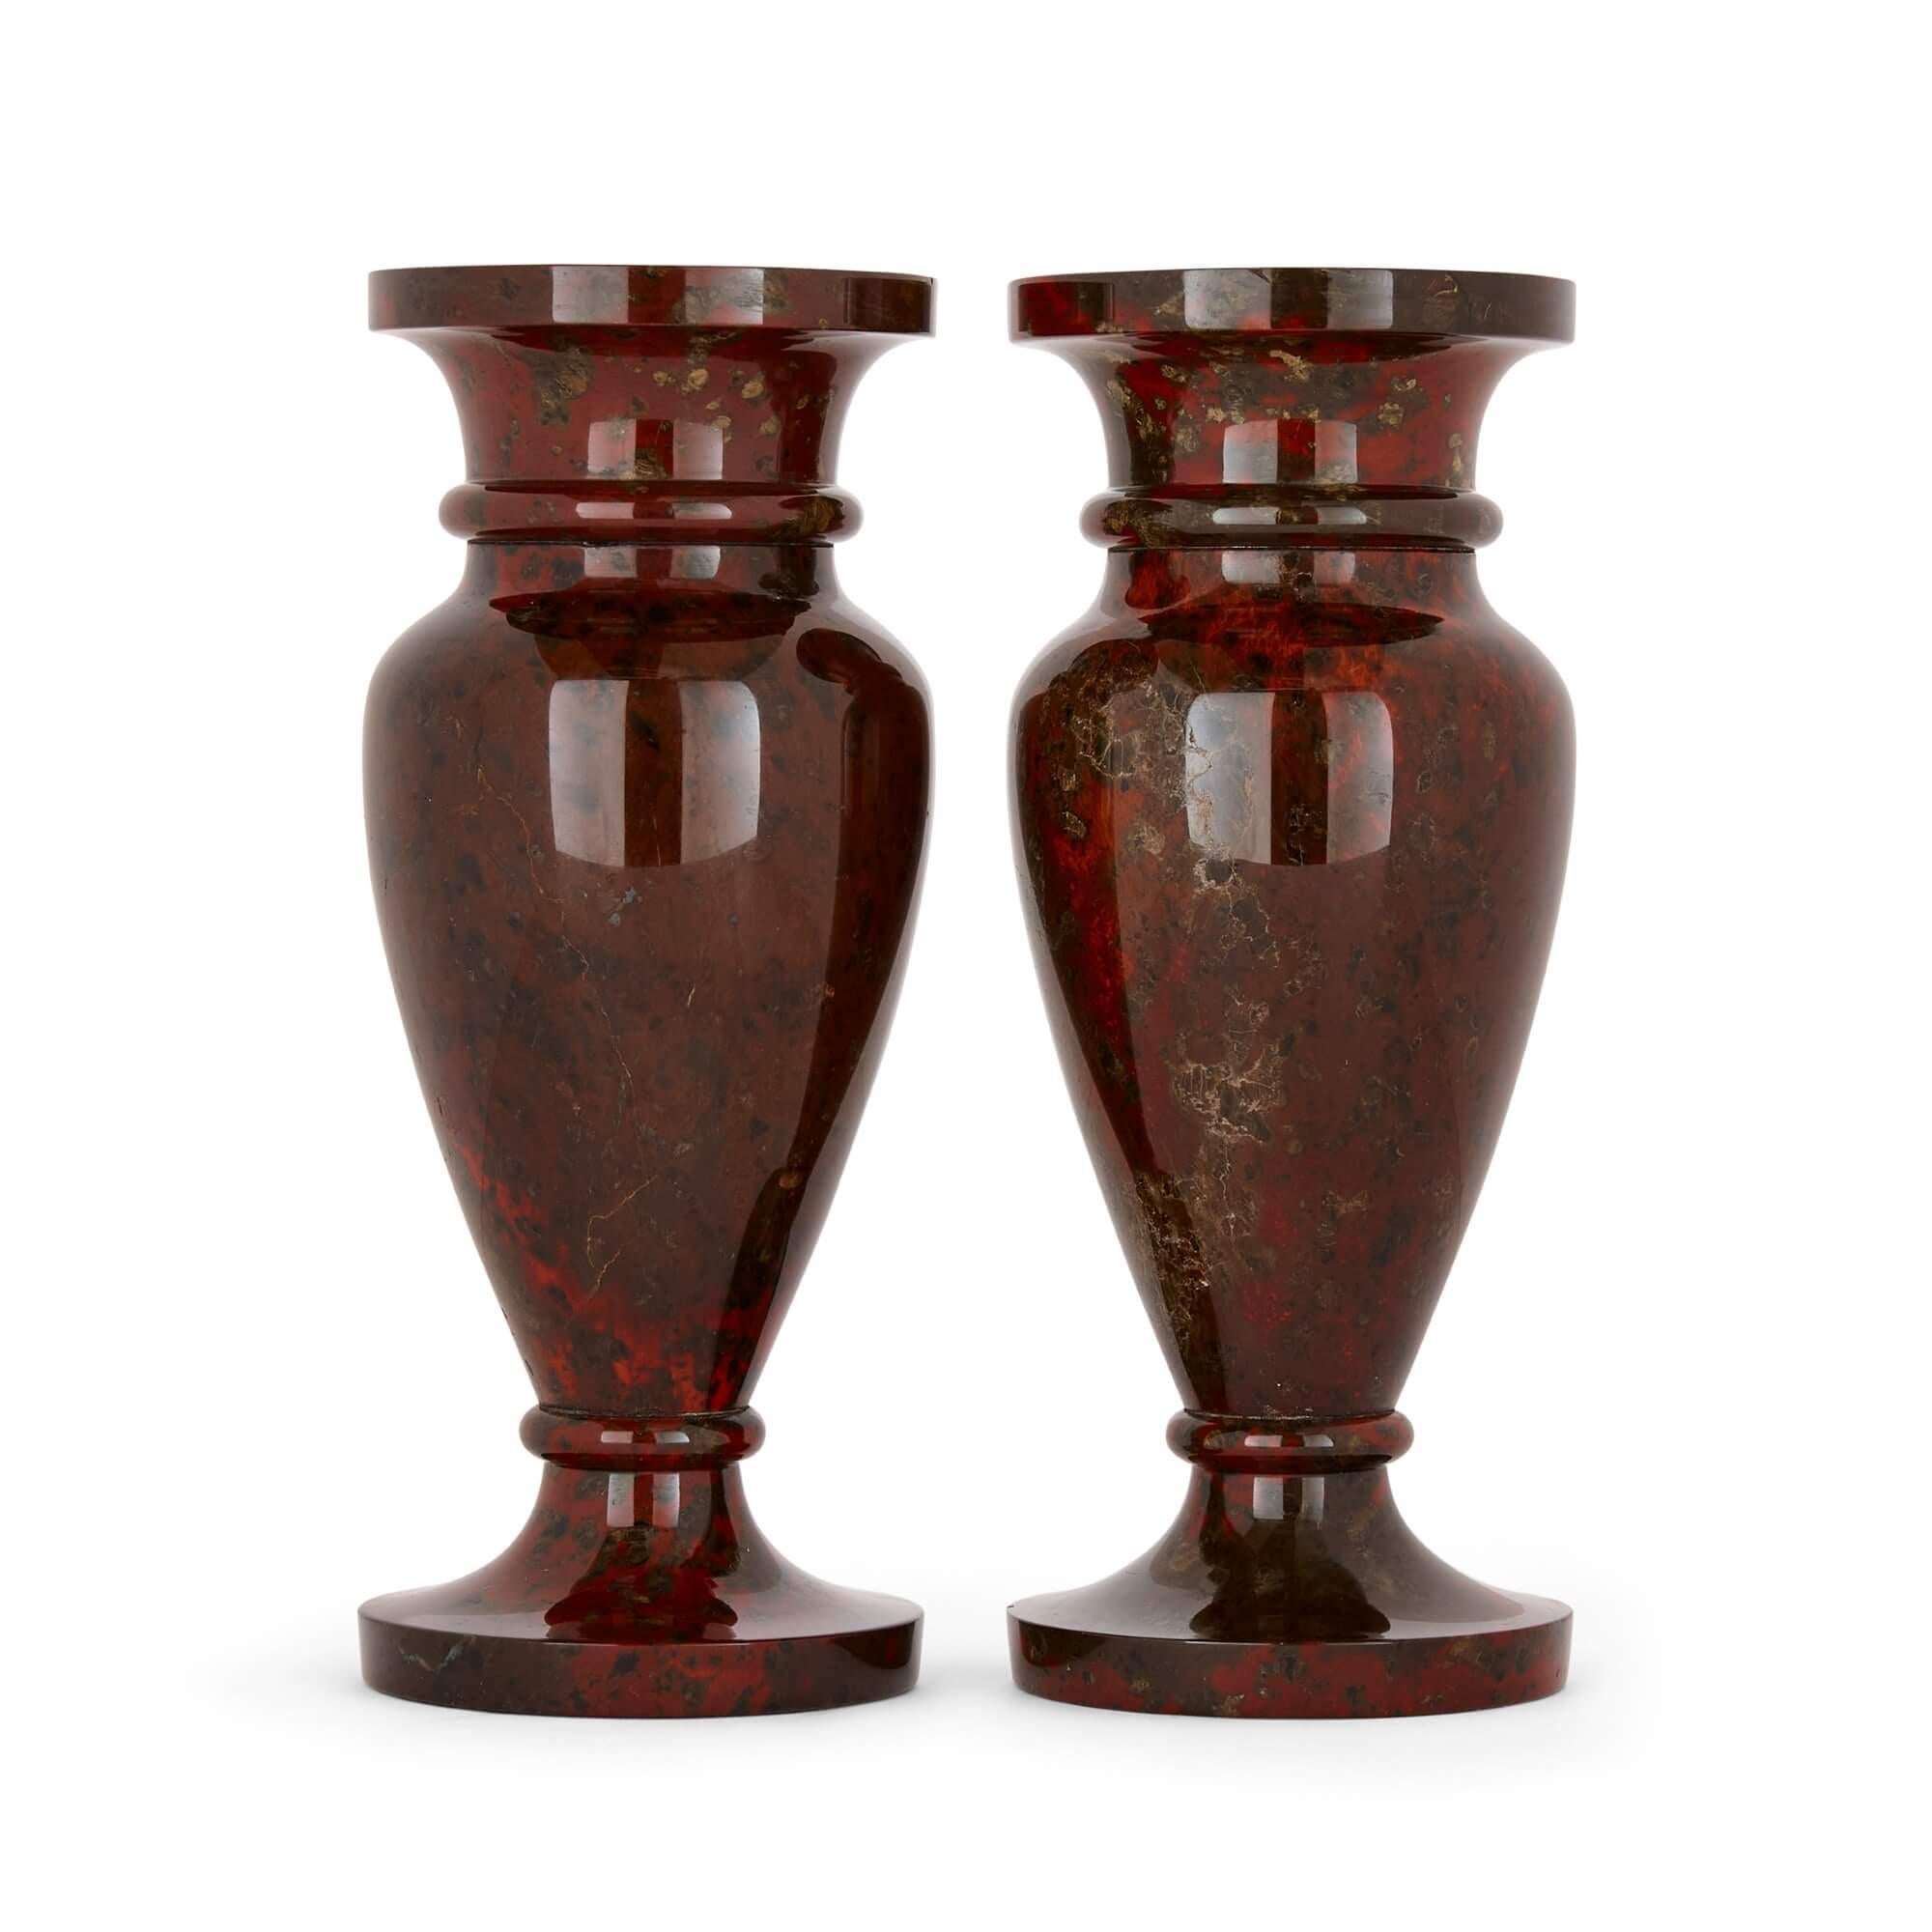 Pair of Cornish Serpentine stone urn vases
English, 20th Century
Height 20.5cm, diameter 8cm

This pair of very interesting vases is crafted from very fine Cornish serpentine, a beautiful stone found at the Southern point of the Lizard peninsula in